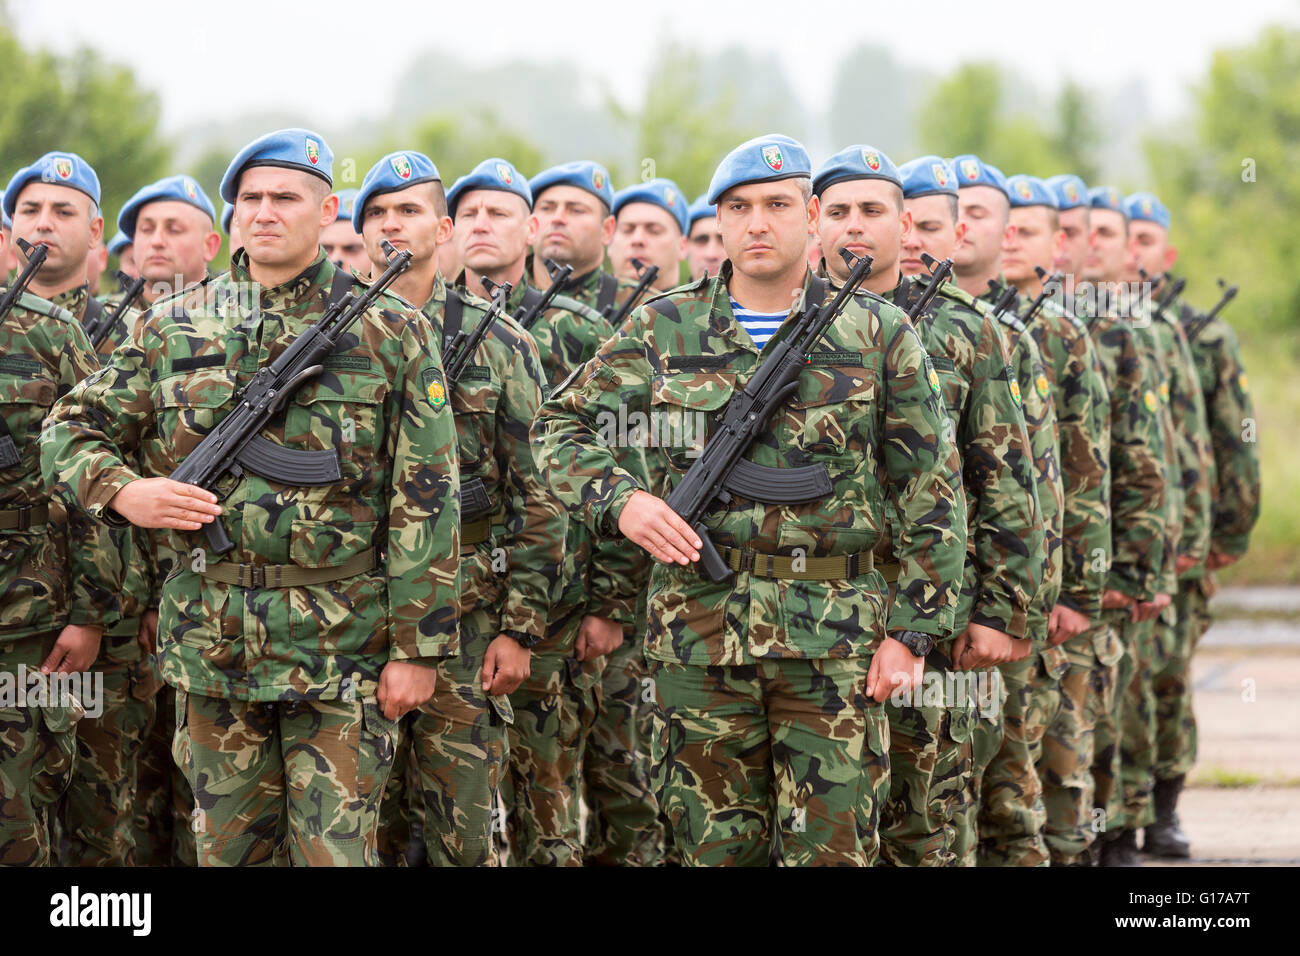 Sofia, Bulgaria - May 4, 2016: Soldiers from the Bulgarian army are preparing for a parade for Army's day in uniforms with Kalas Stock Photo